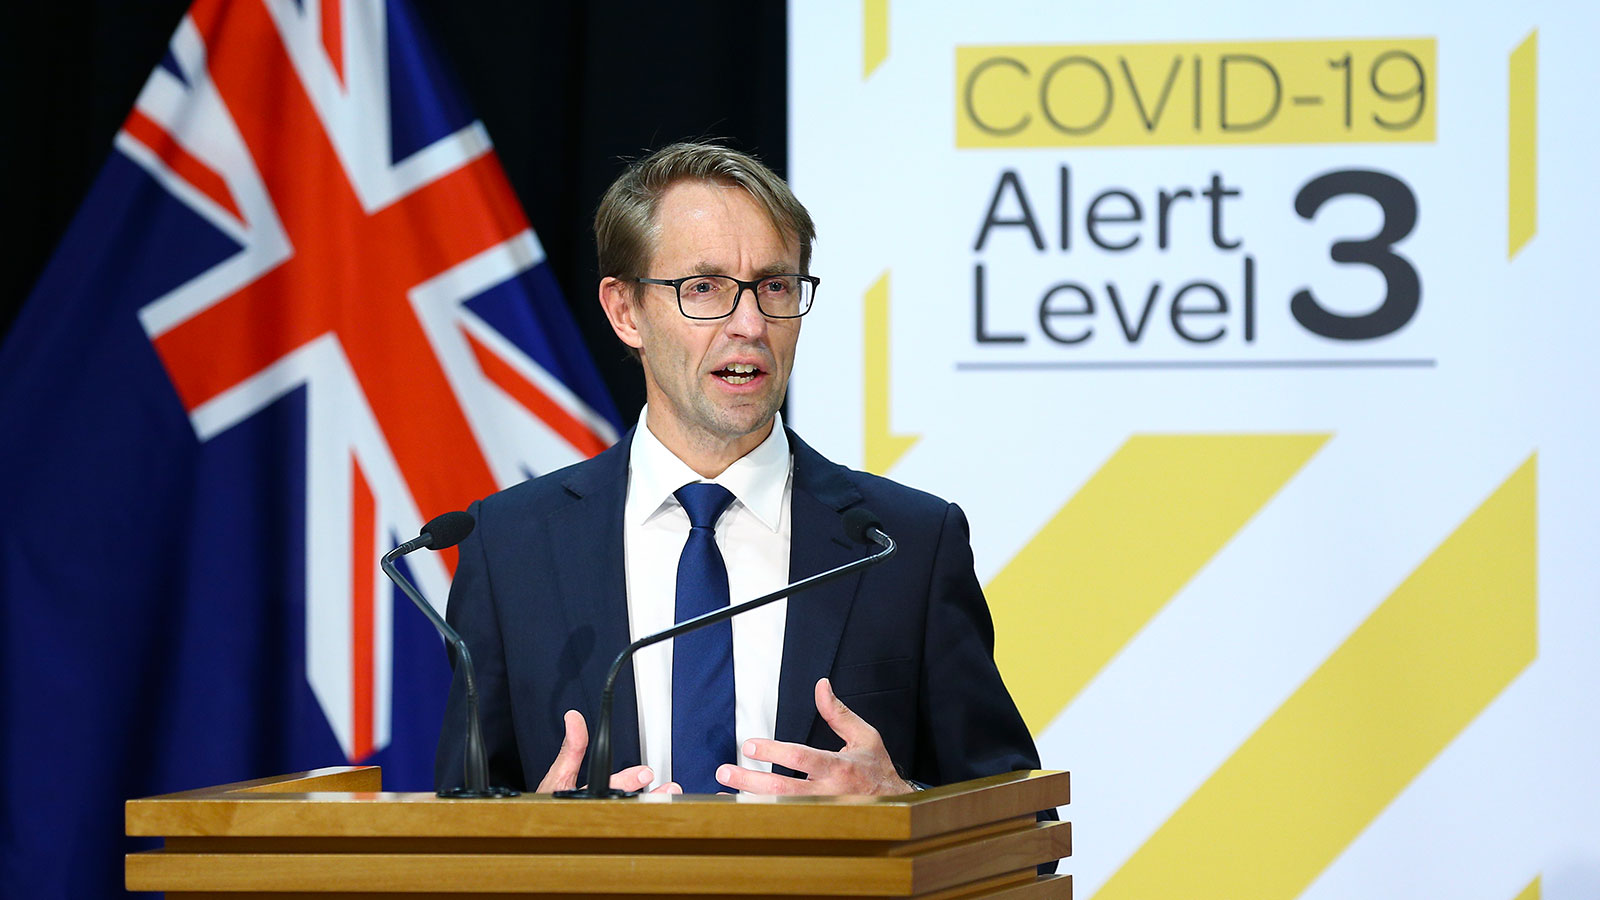 Director-General of Health Dr. Ashley Bloomfield speaks to media during a news conference at Parliament in Wellington, New Zealand on May 4.